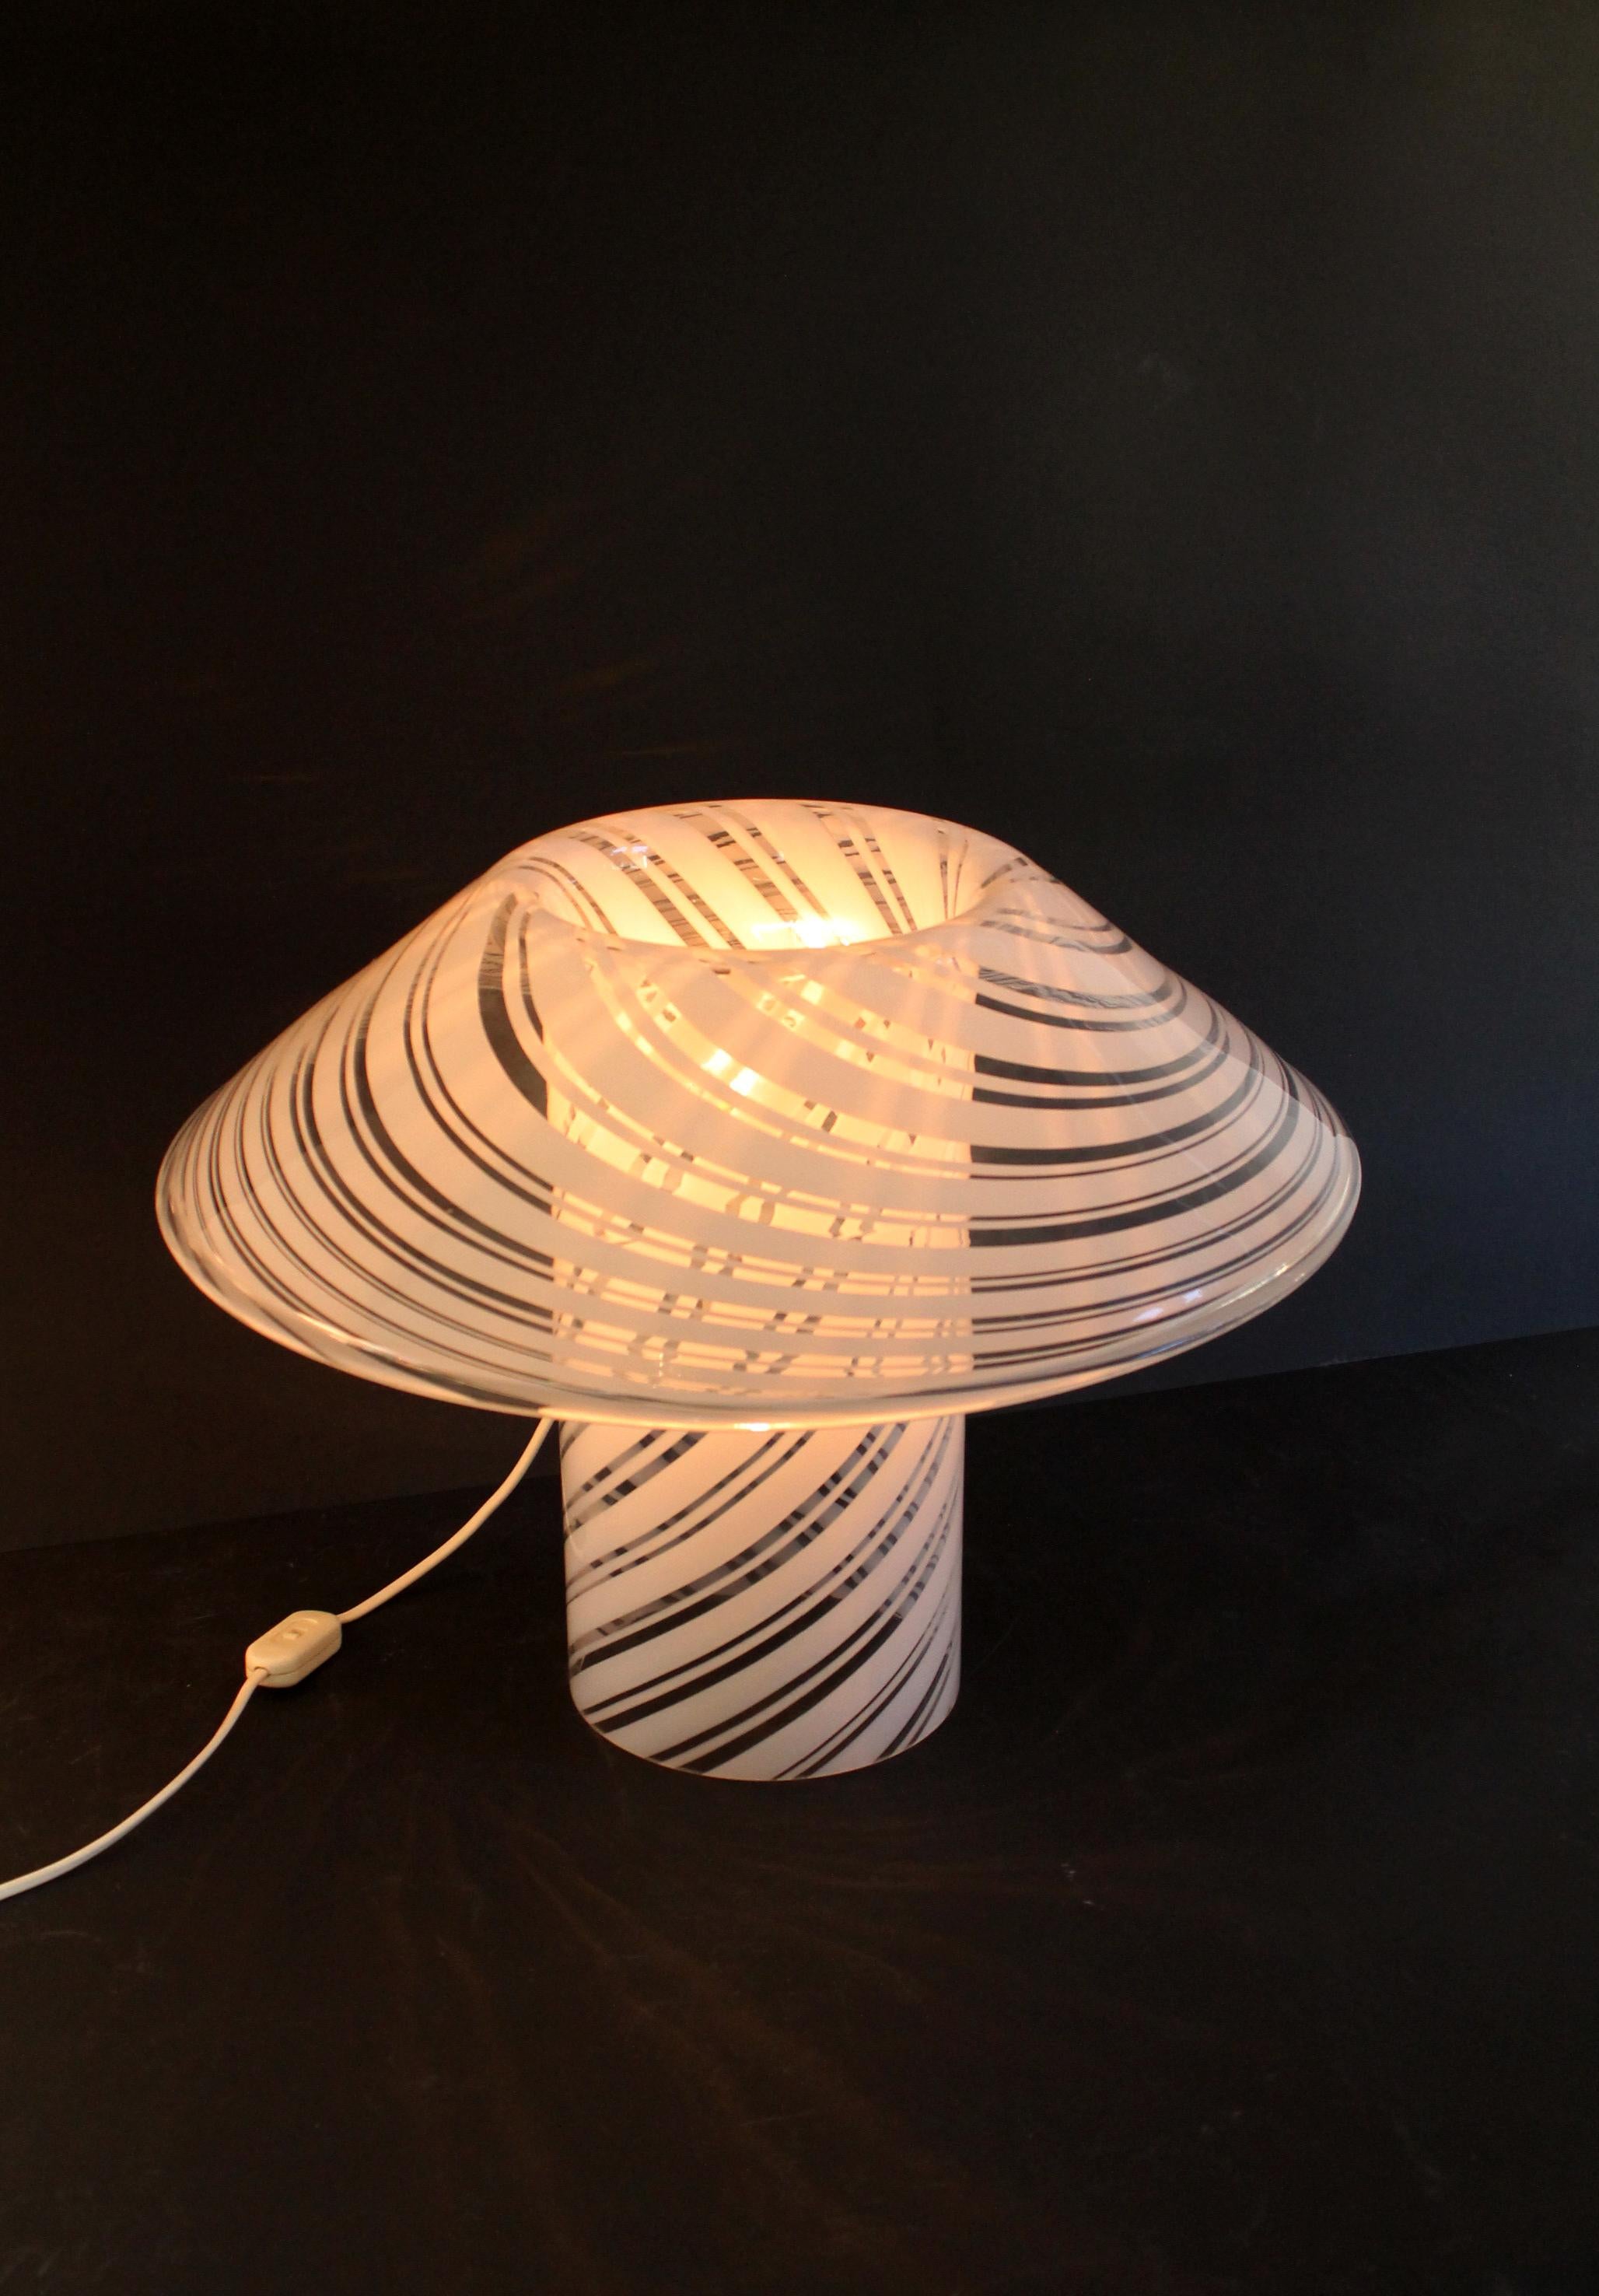 1980s Lino Tagliapietra Murano glass stunning desk/table lamp. A real eye-catcher!
A White / clear glass gorgeous creation 

A beautiful work of art made by the famous glass Master Lino Tagliapietra. This duo match (clear + opaline swirl Murano